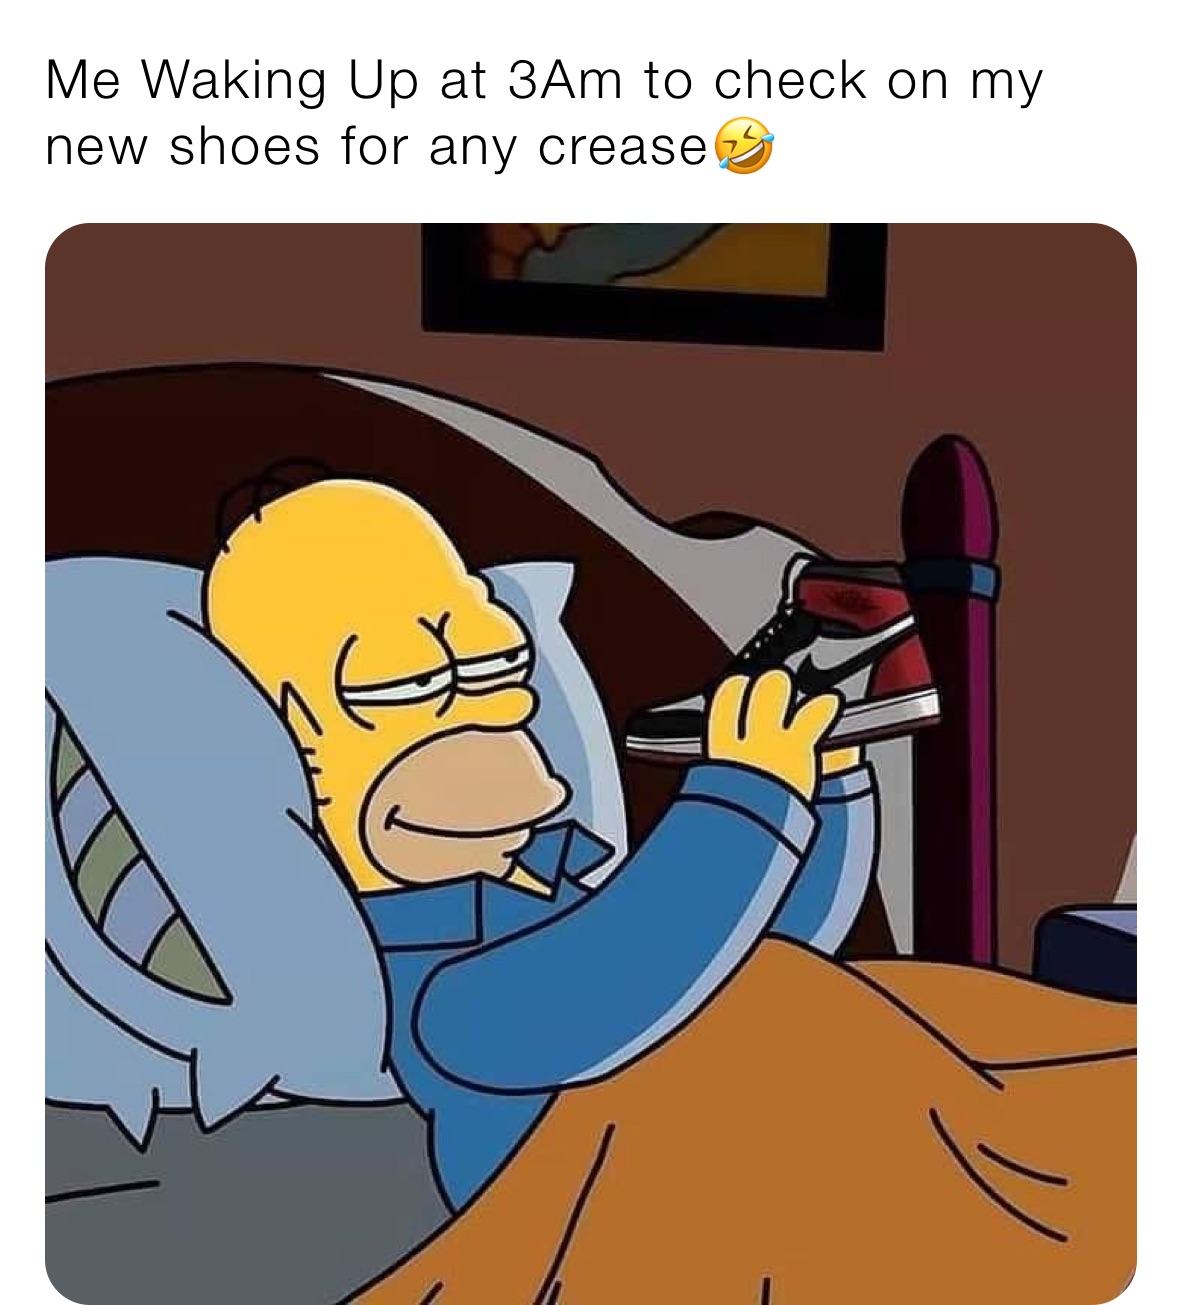 Me Waking Up at 3Am to check on my new shoes for any crease🤣 | @OT_Rudy ...